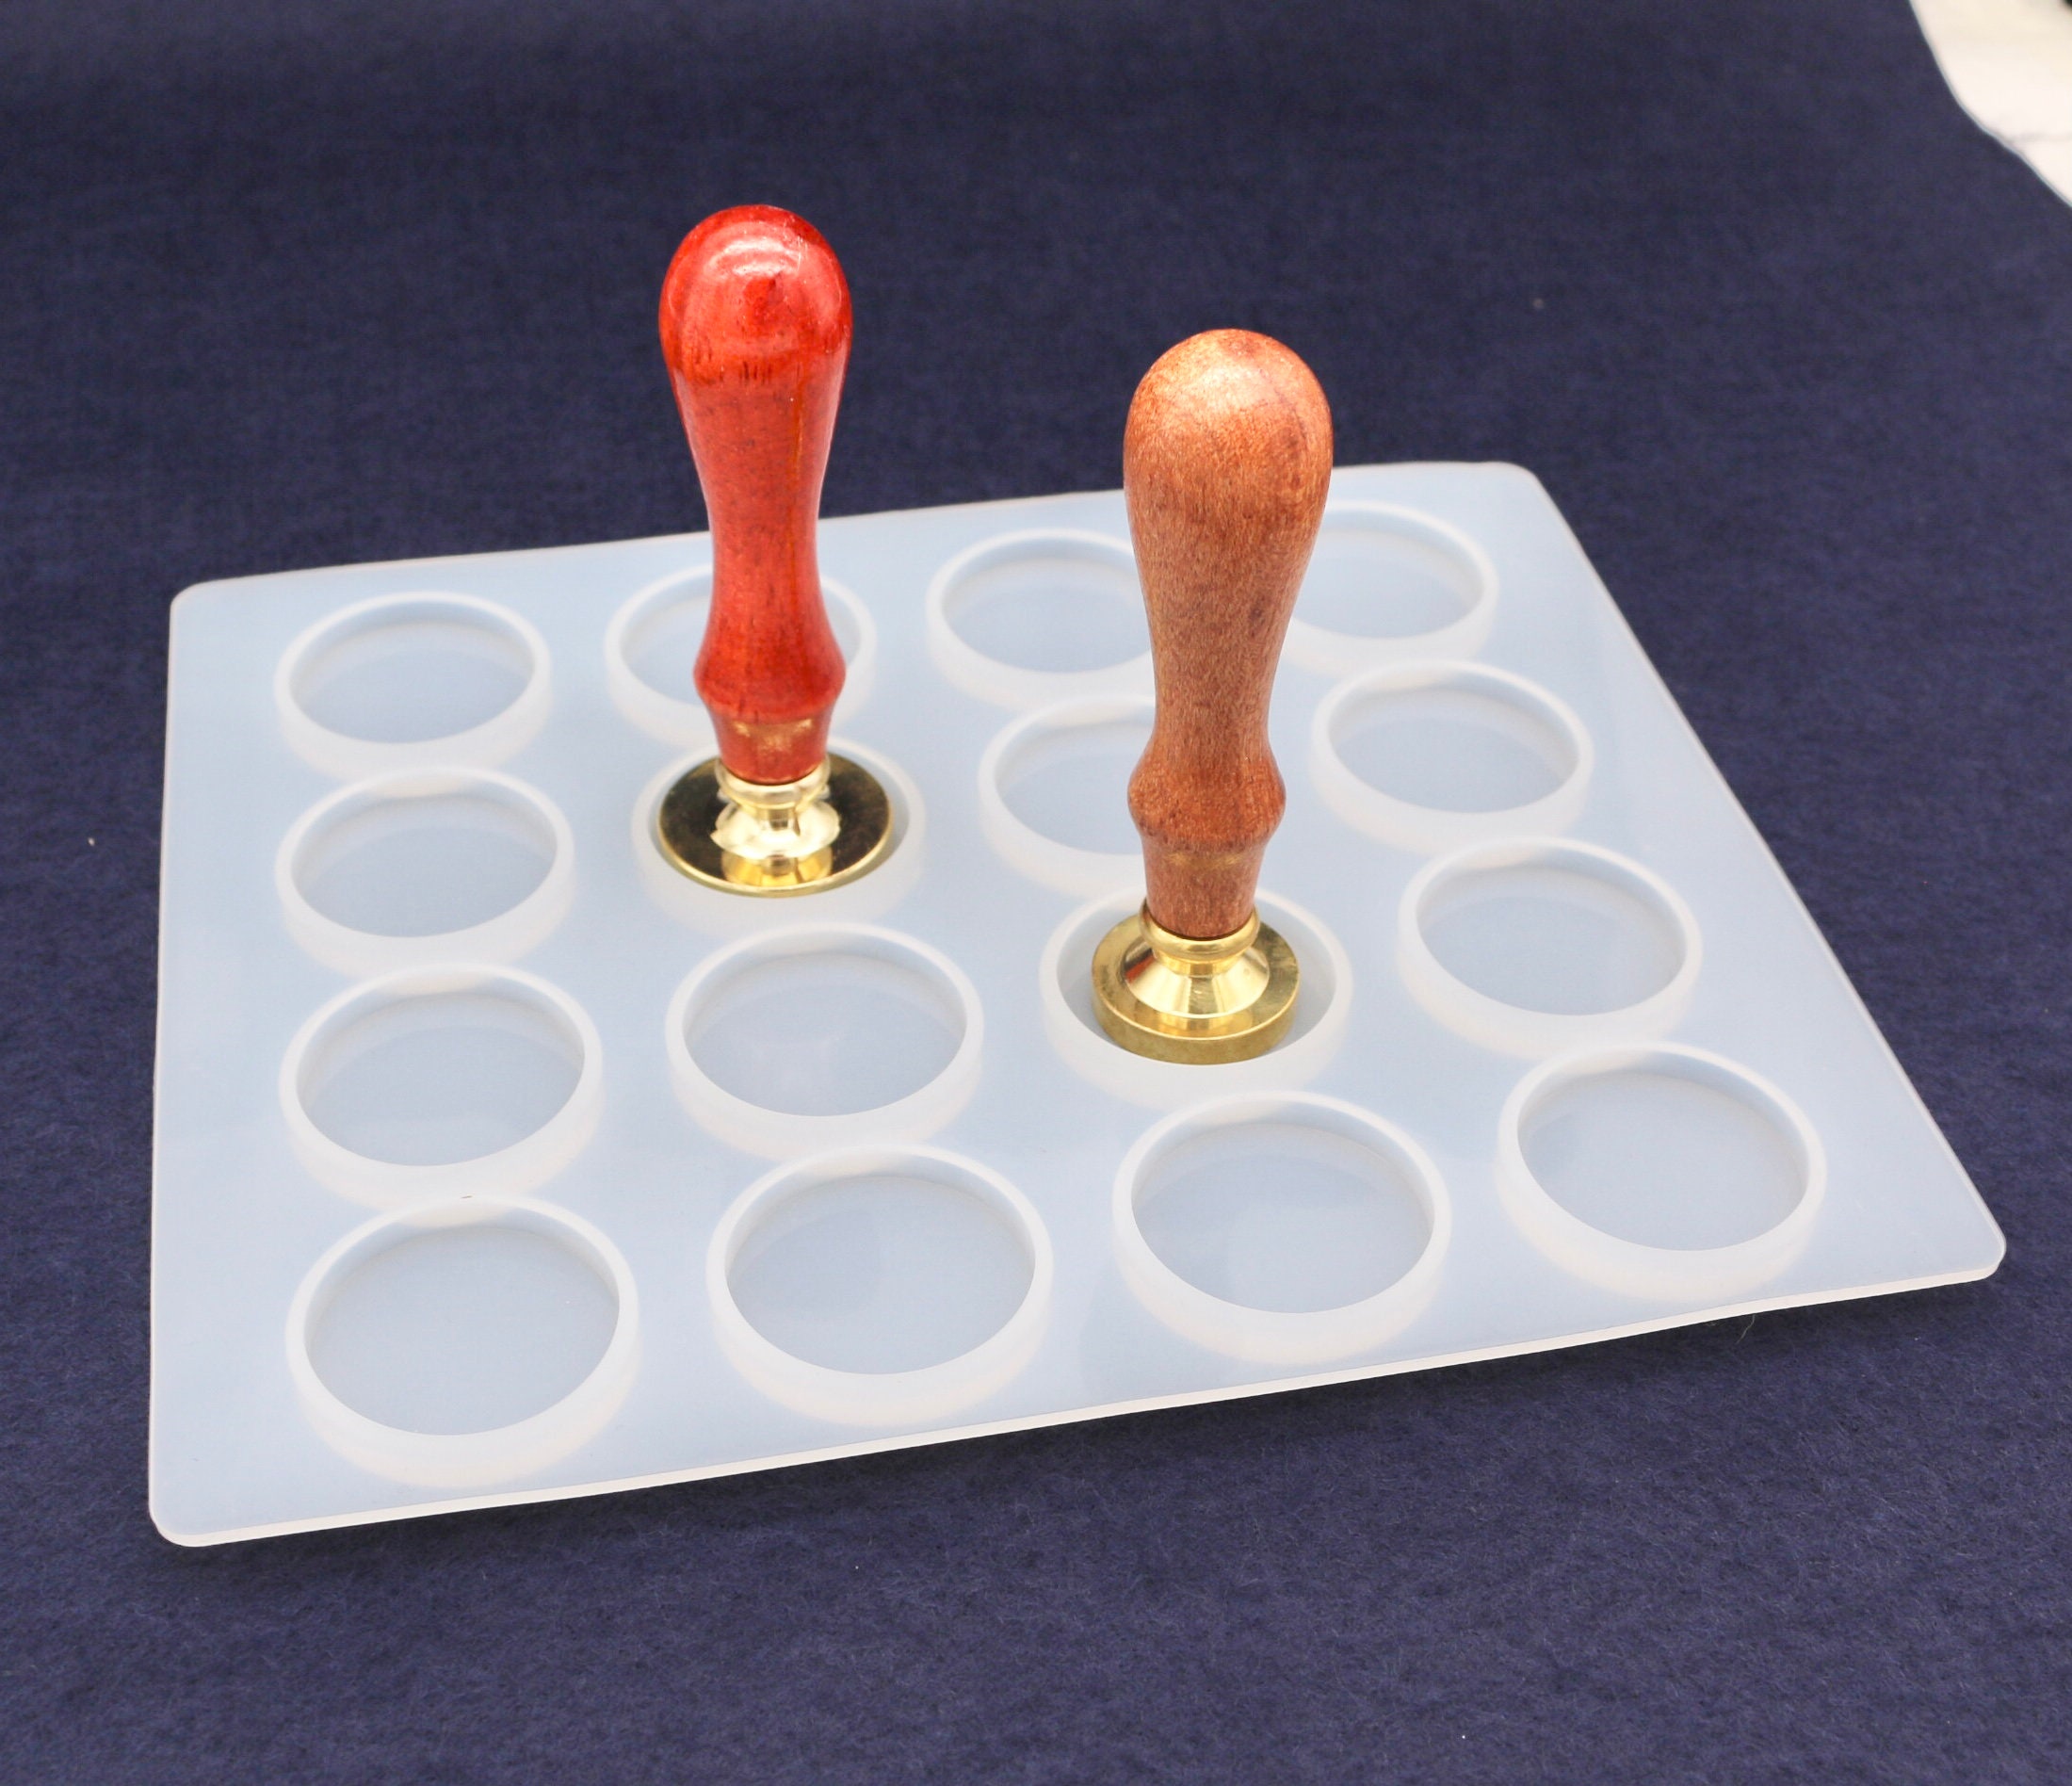 Durable Wax Seal Mold Golden Wax Seal Making Mould Multi-shapes